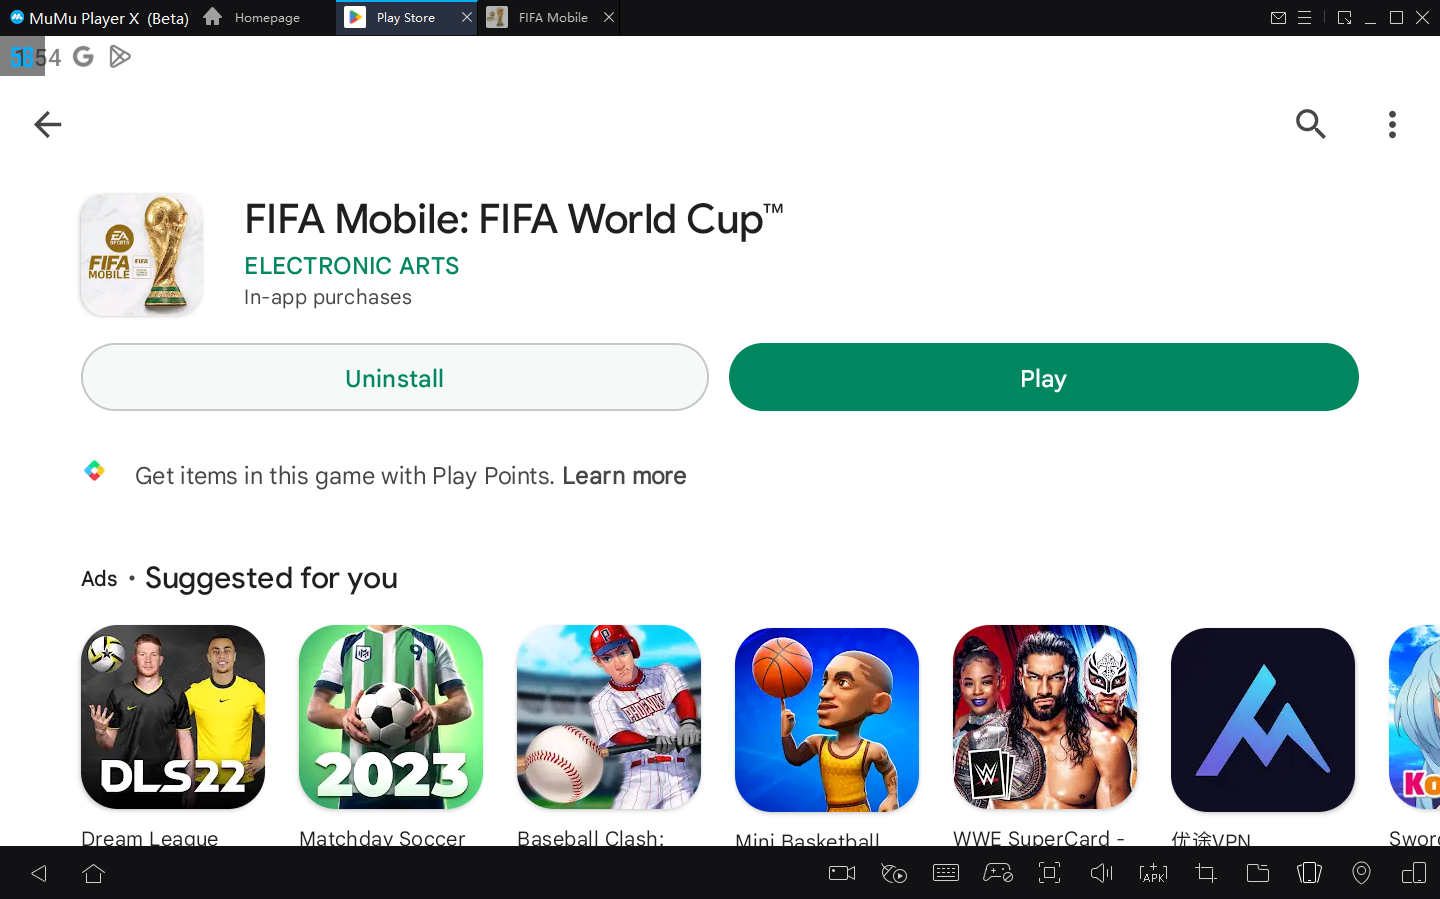 How to Play FIFA Mobile: FIFA World Cup™ on PC with MuMu Player X